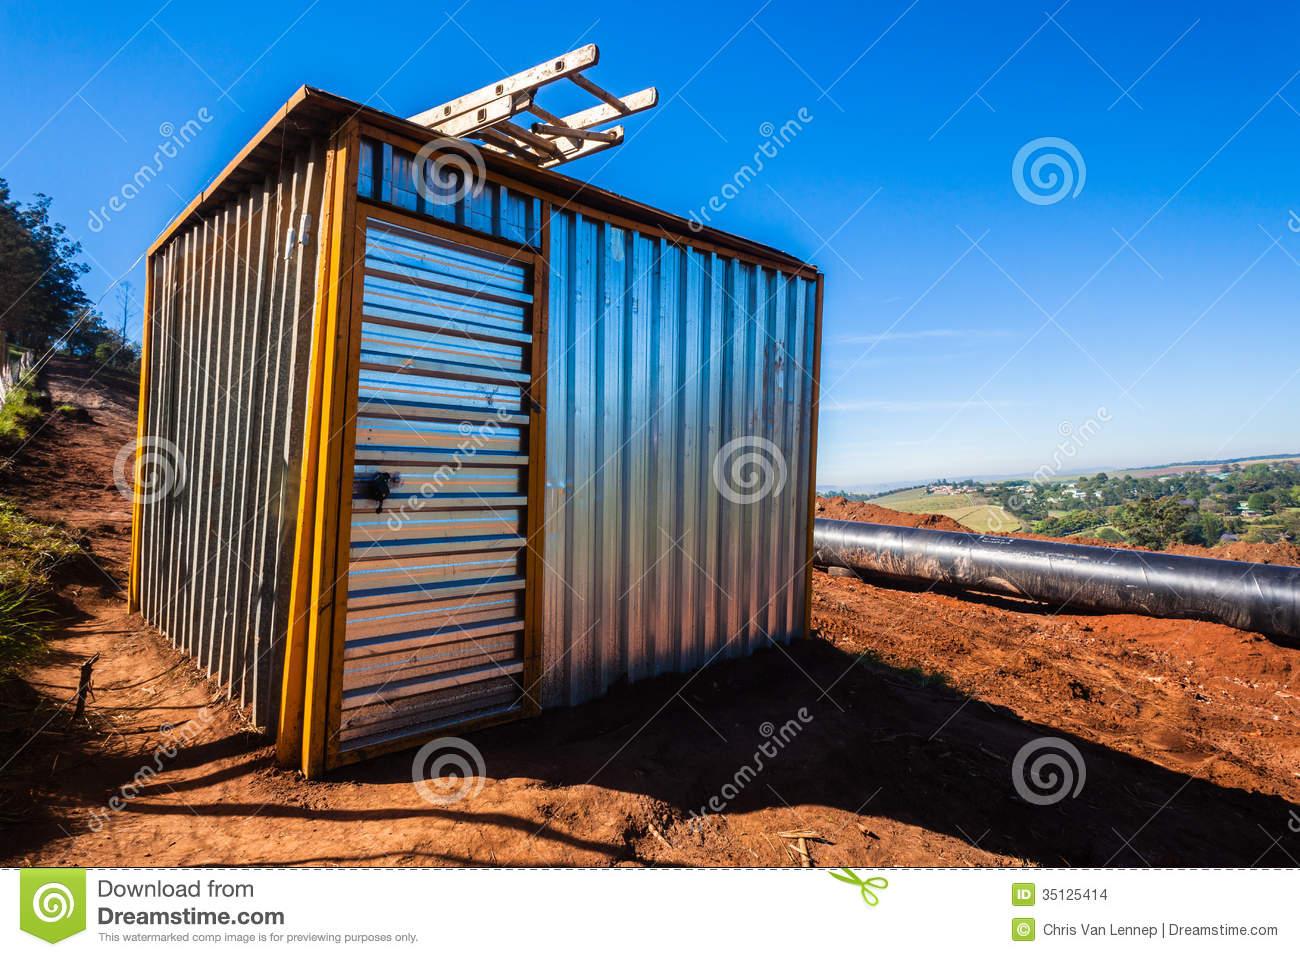 Steel Tool Shed Construction Stock Images   Image  35125414